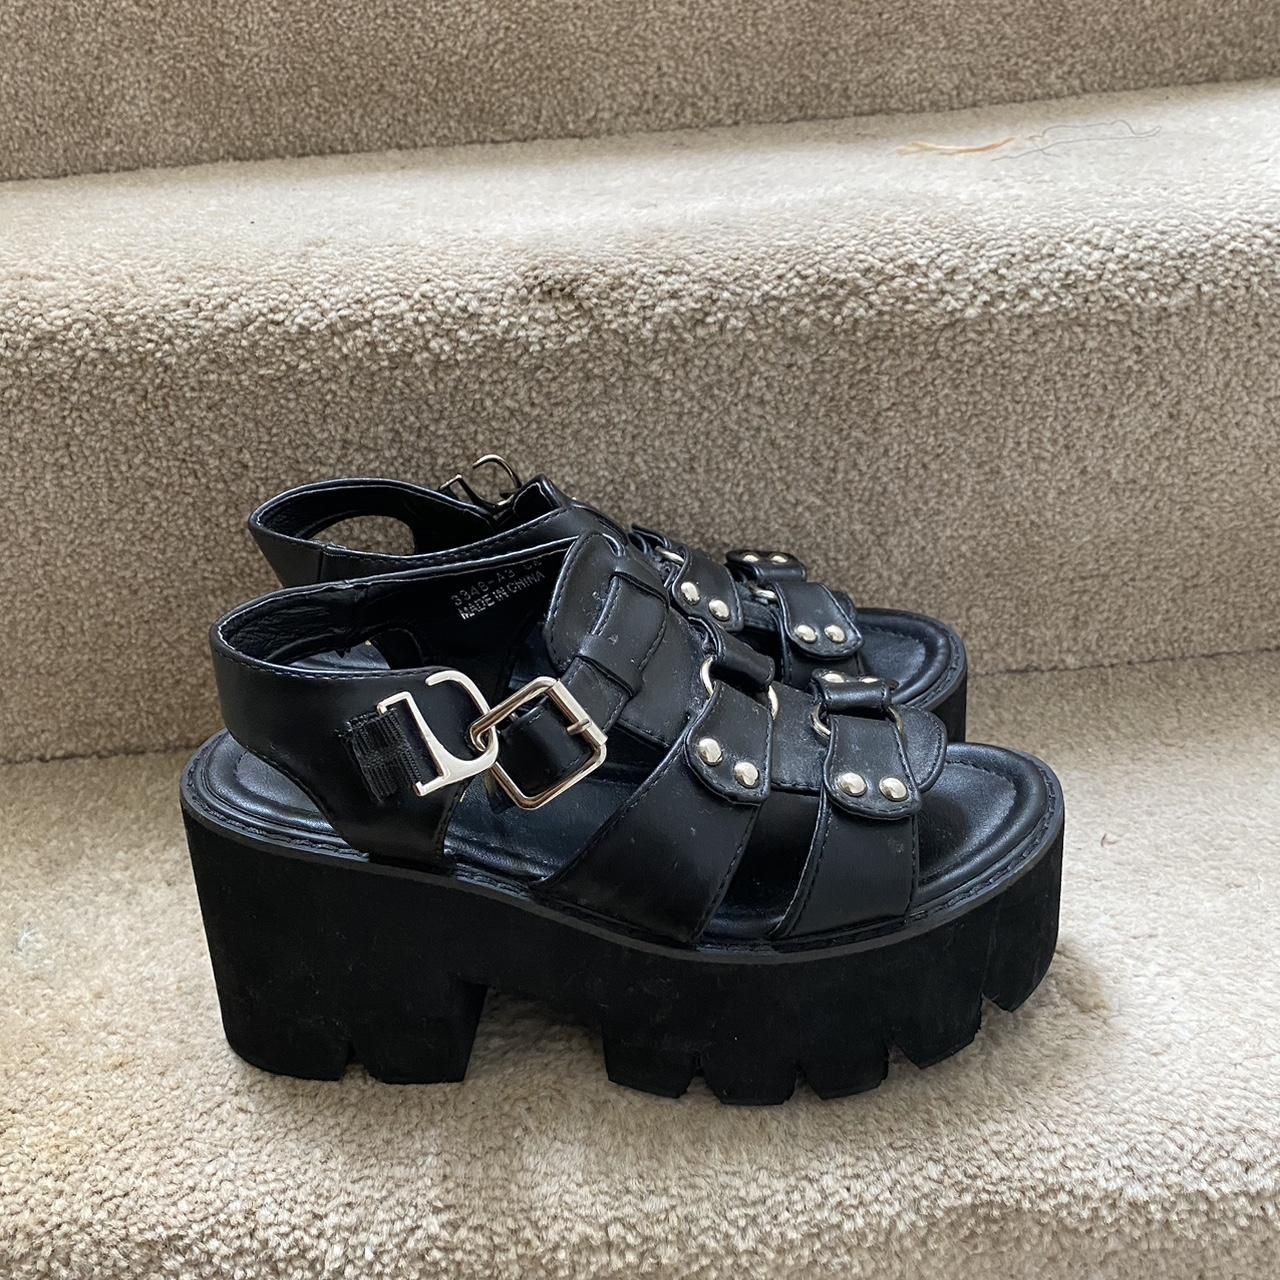 Open Toe Buckle Decor Wedges • Only worn once • No... - Depop